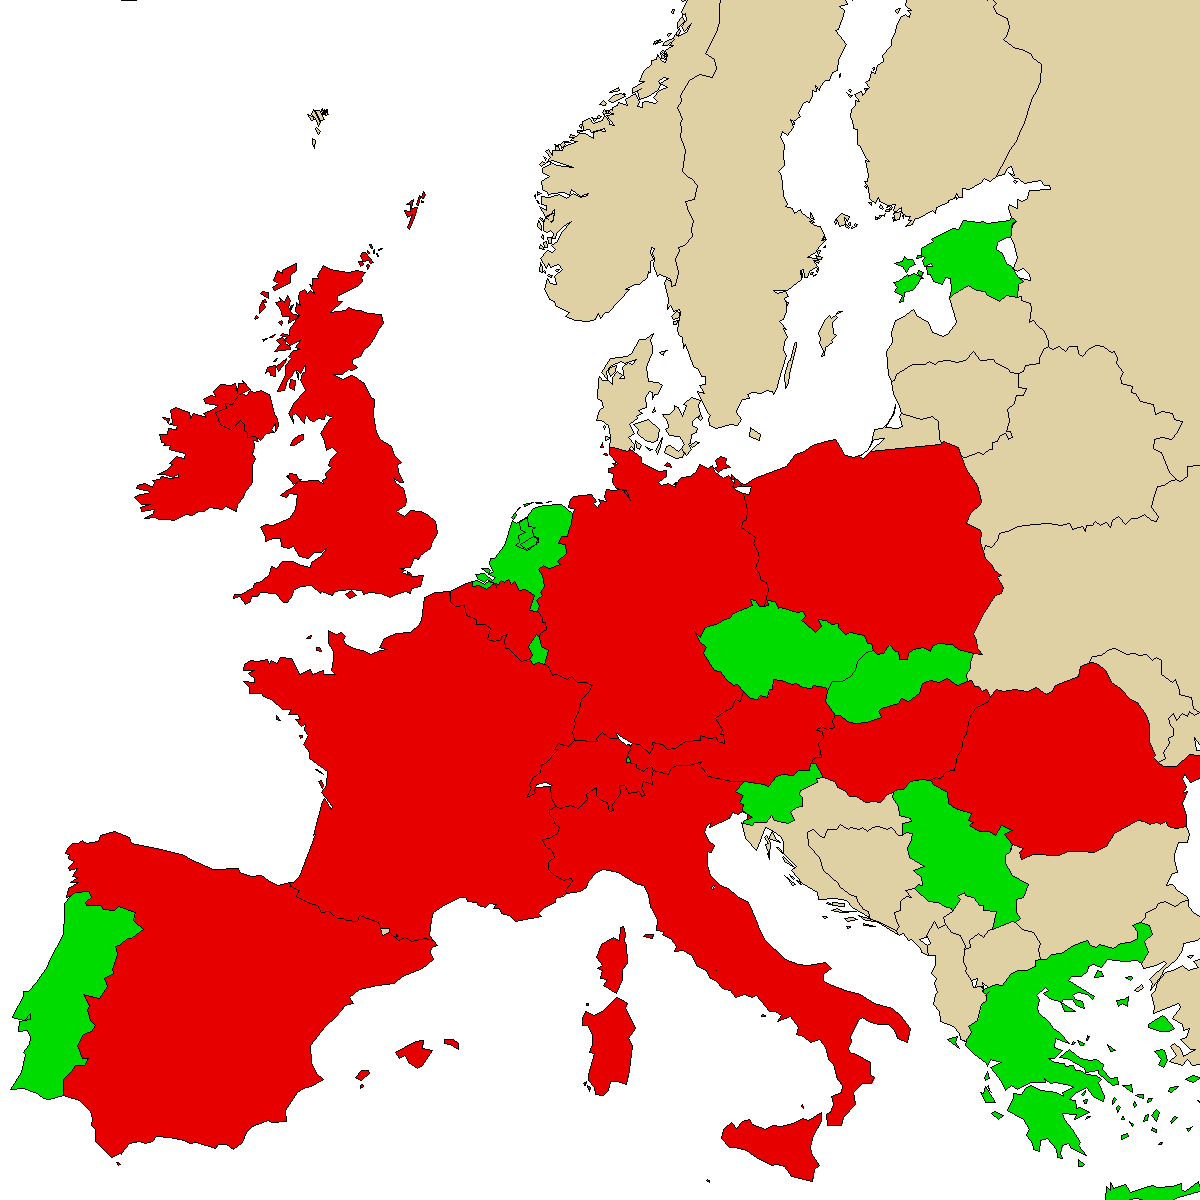 legal info map for our product 3CC, green are countries with no ban, red with ban, grey is unknown